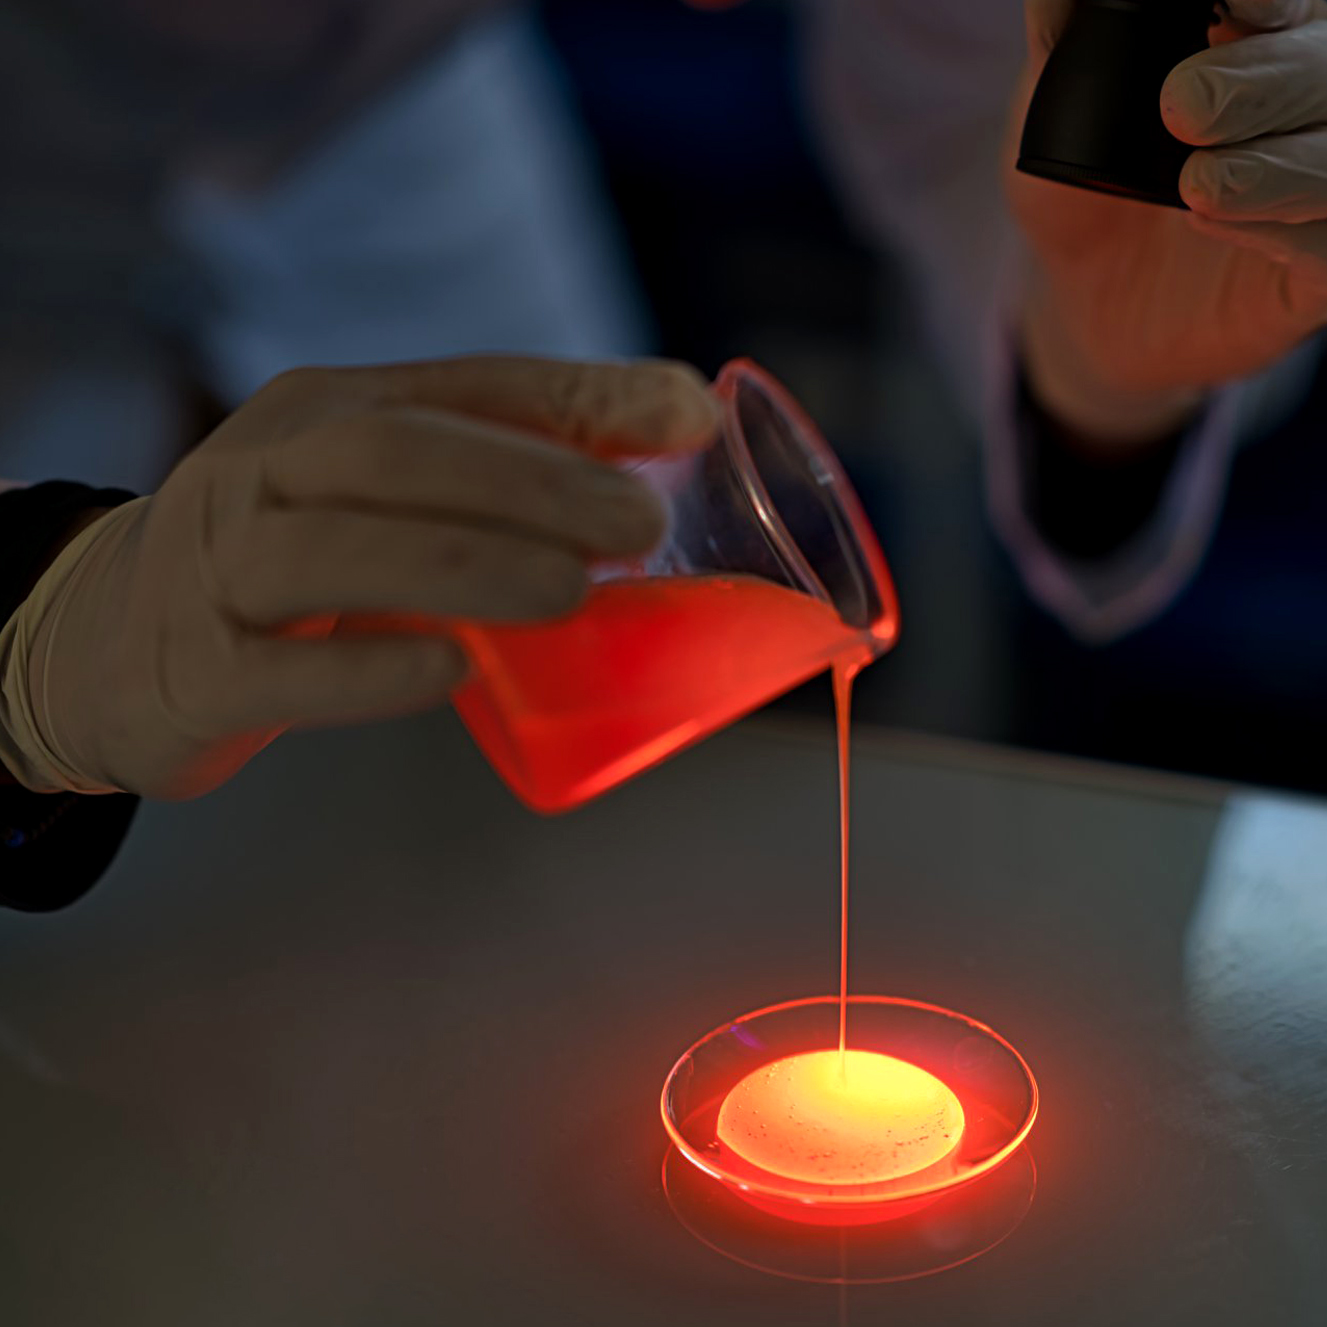 European leader in fluorescence and dye tracing solutions, FLUOTECHNIK develops tracing techniques annually